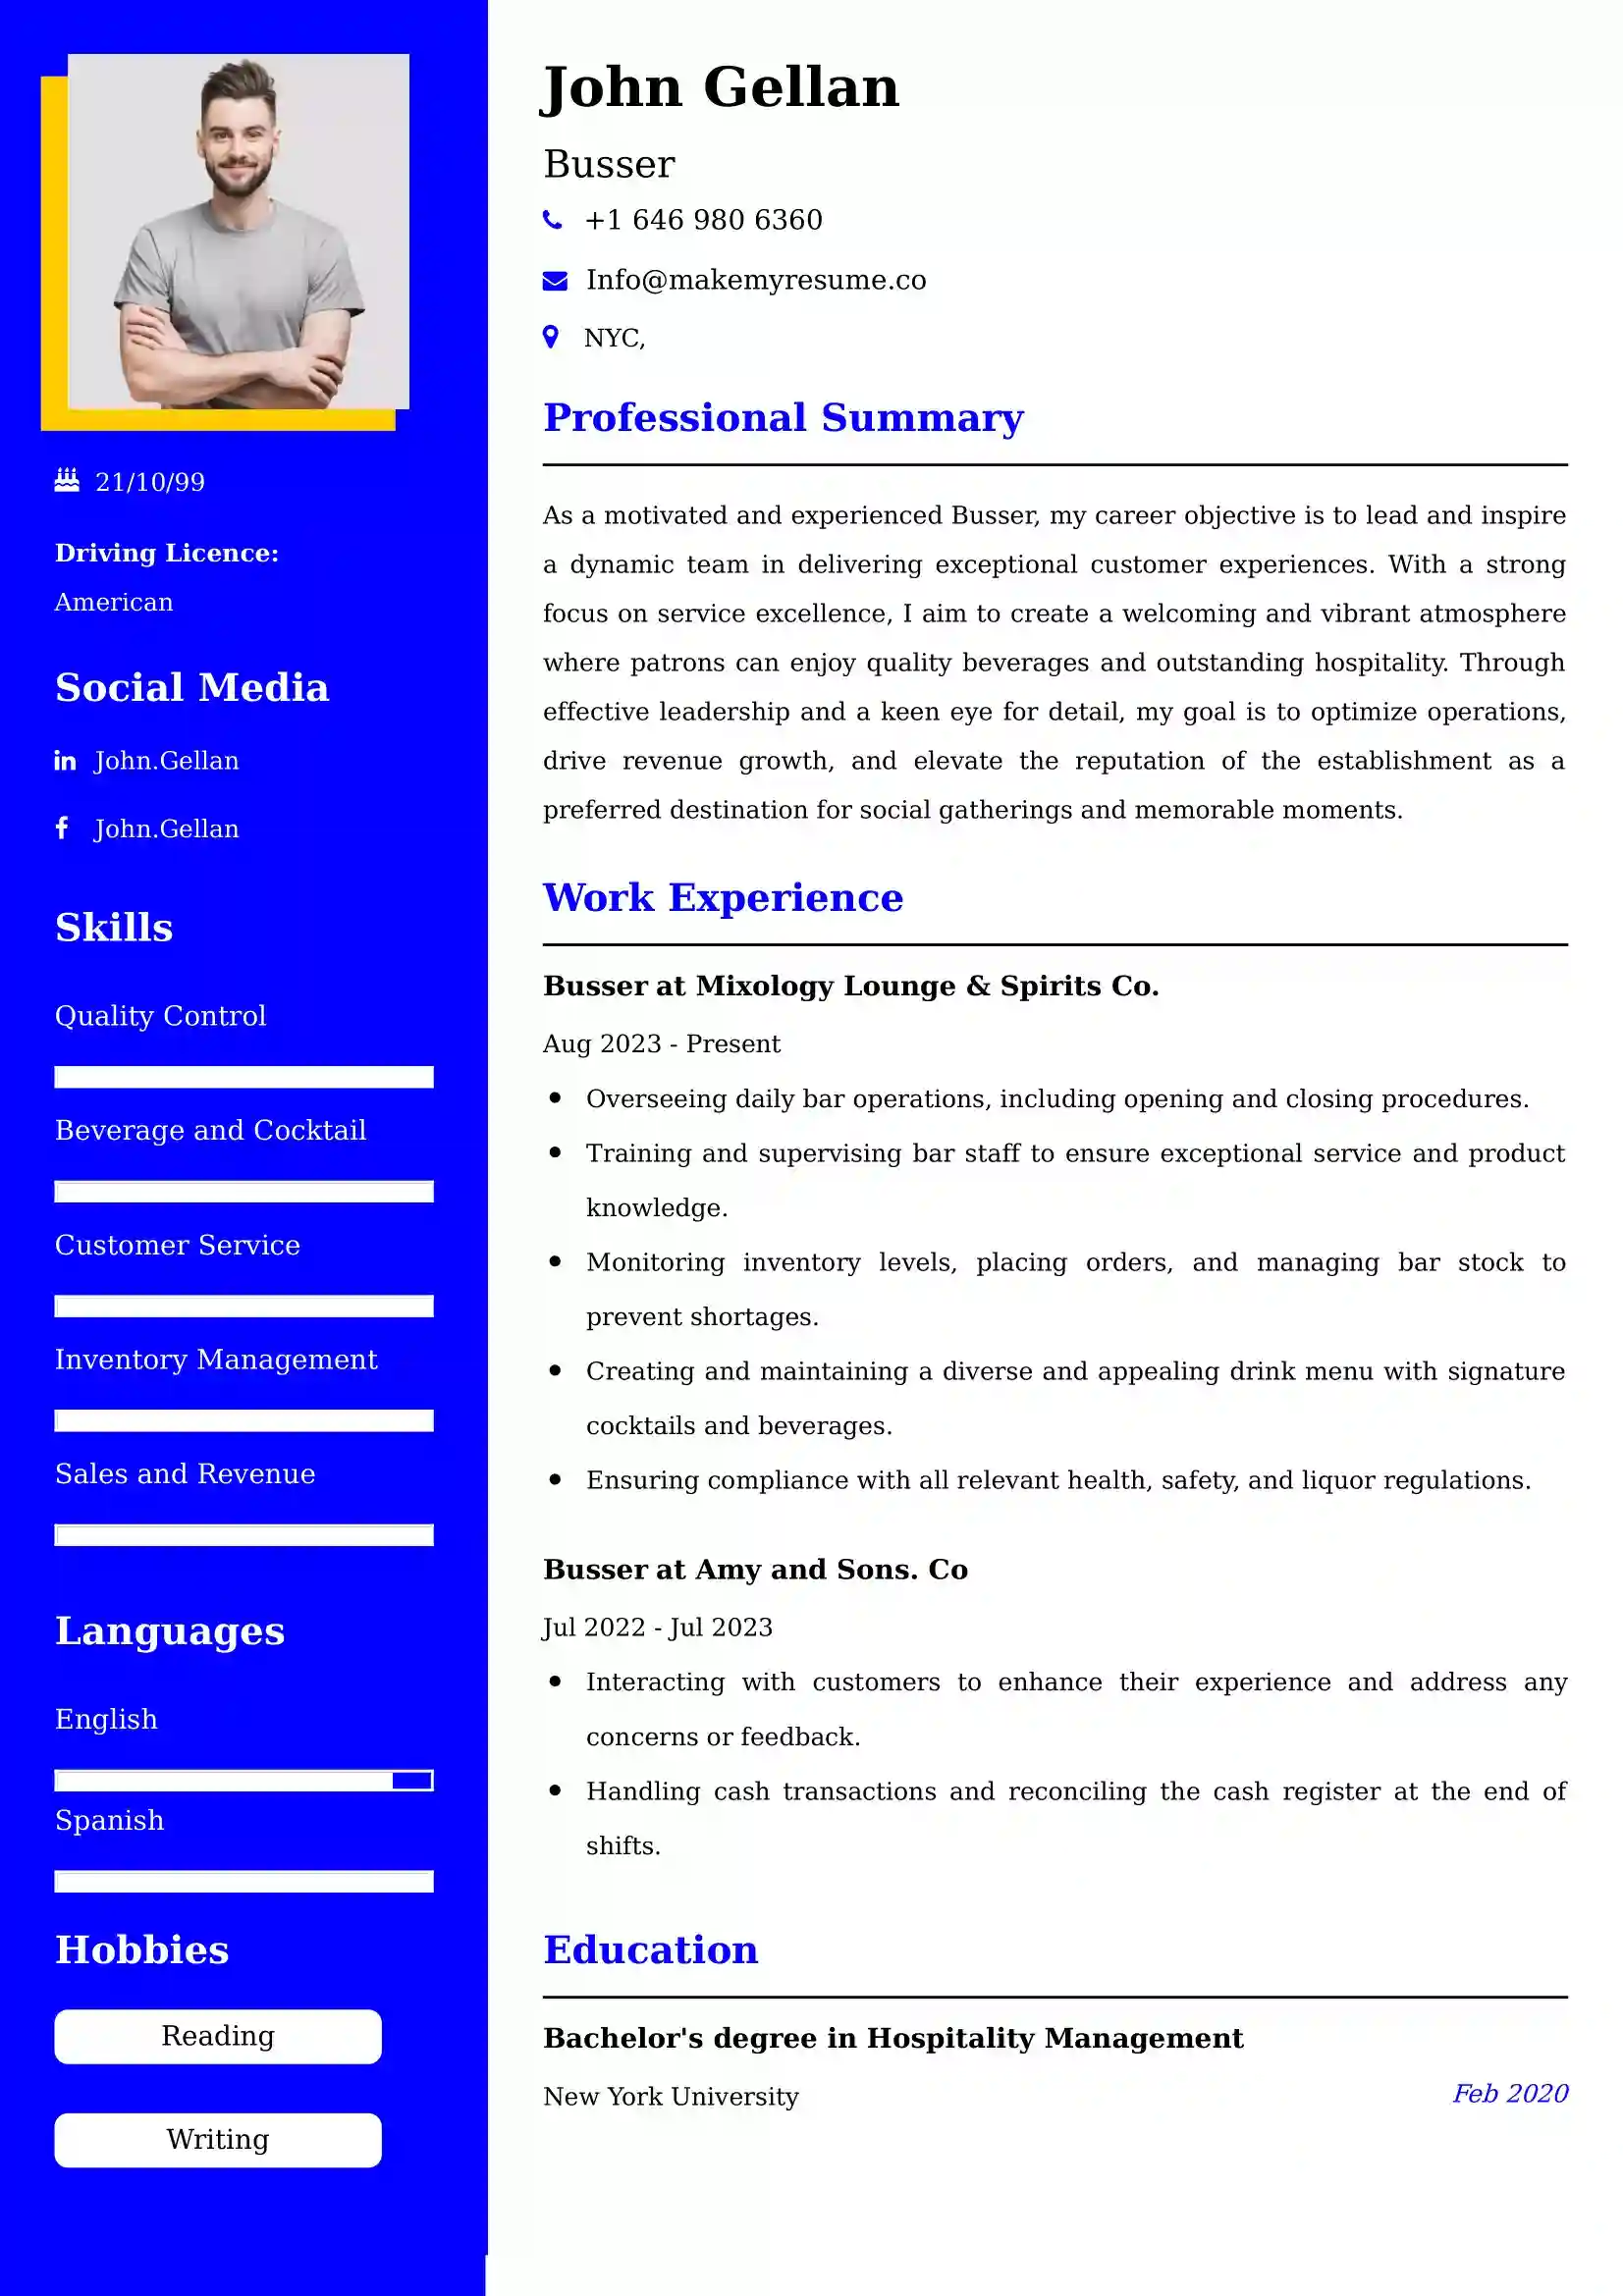 Busser Resume Examples for UK Jobs - Tips and Guide